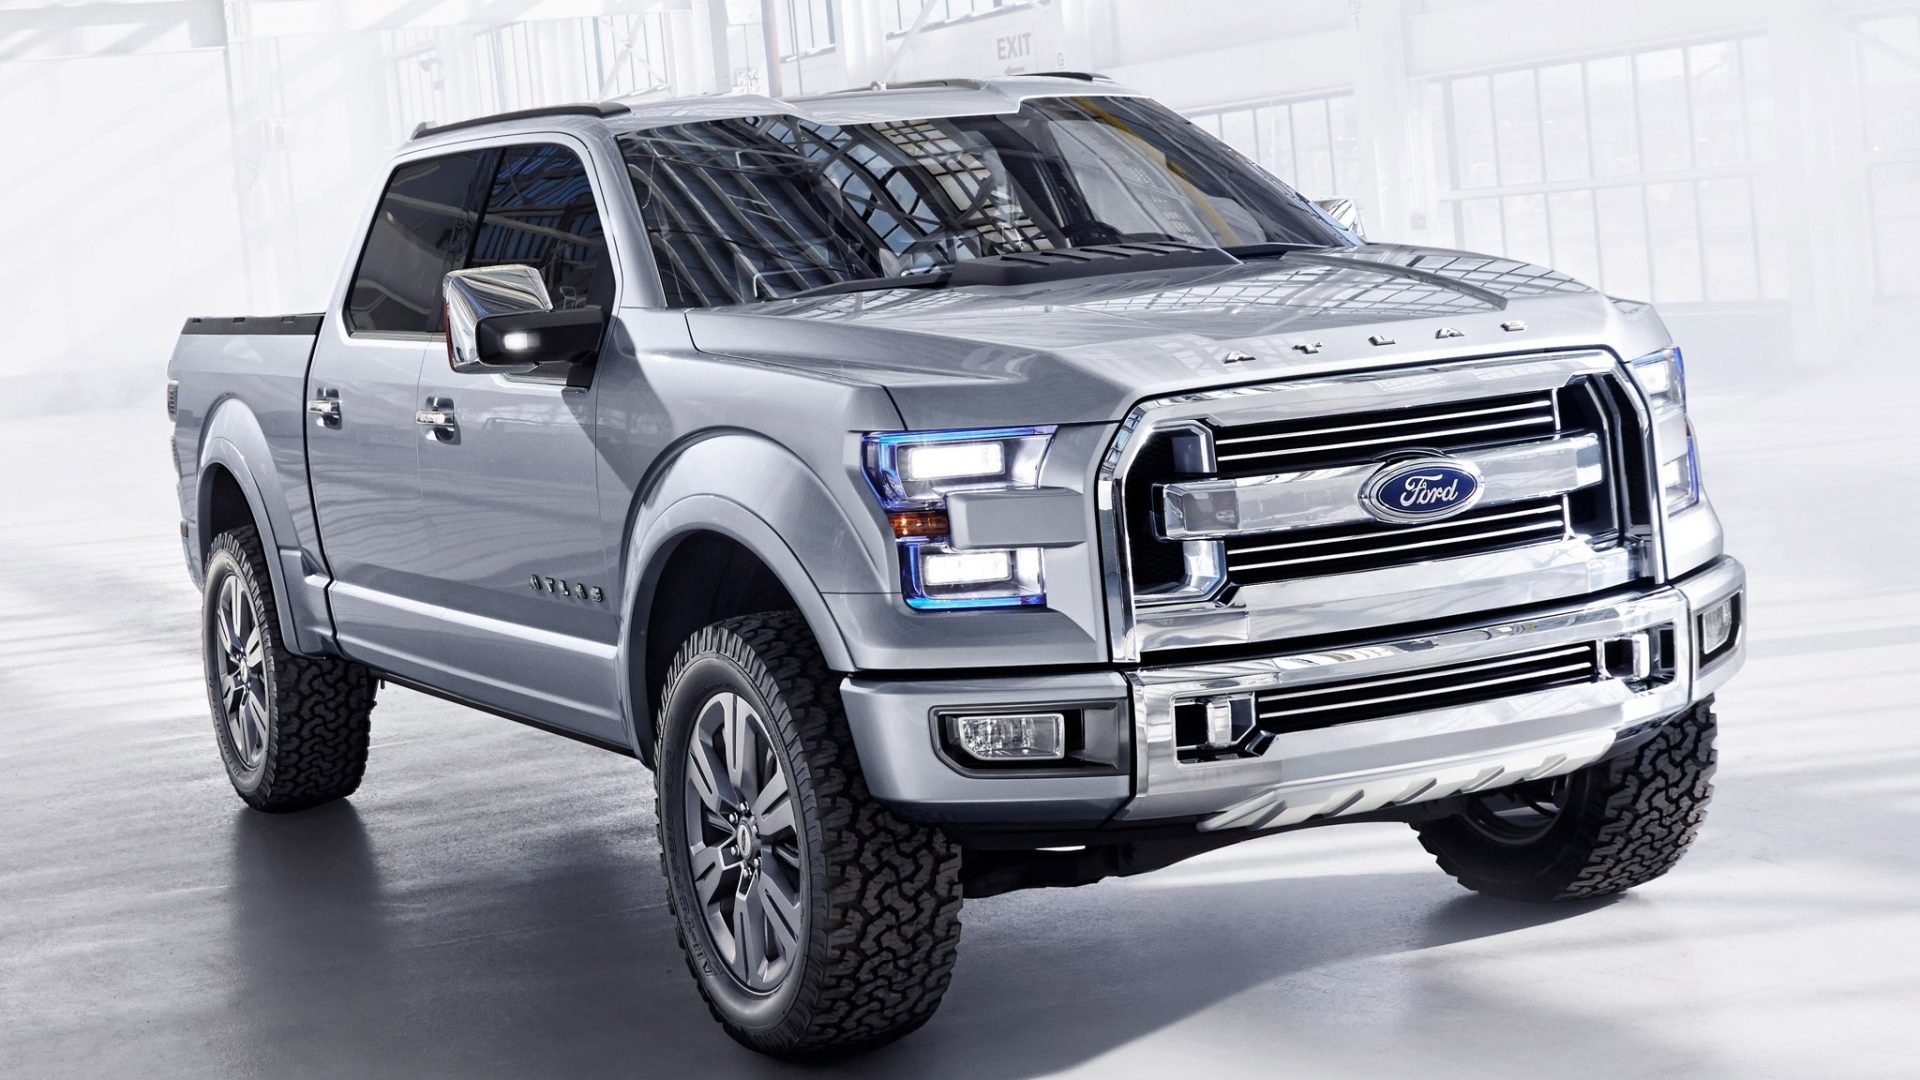 1920x1080 wallpaper.wiki-Ford-truck-wallpaper-android--PIC-